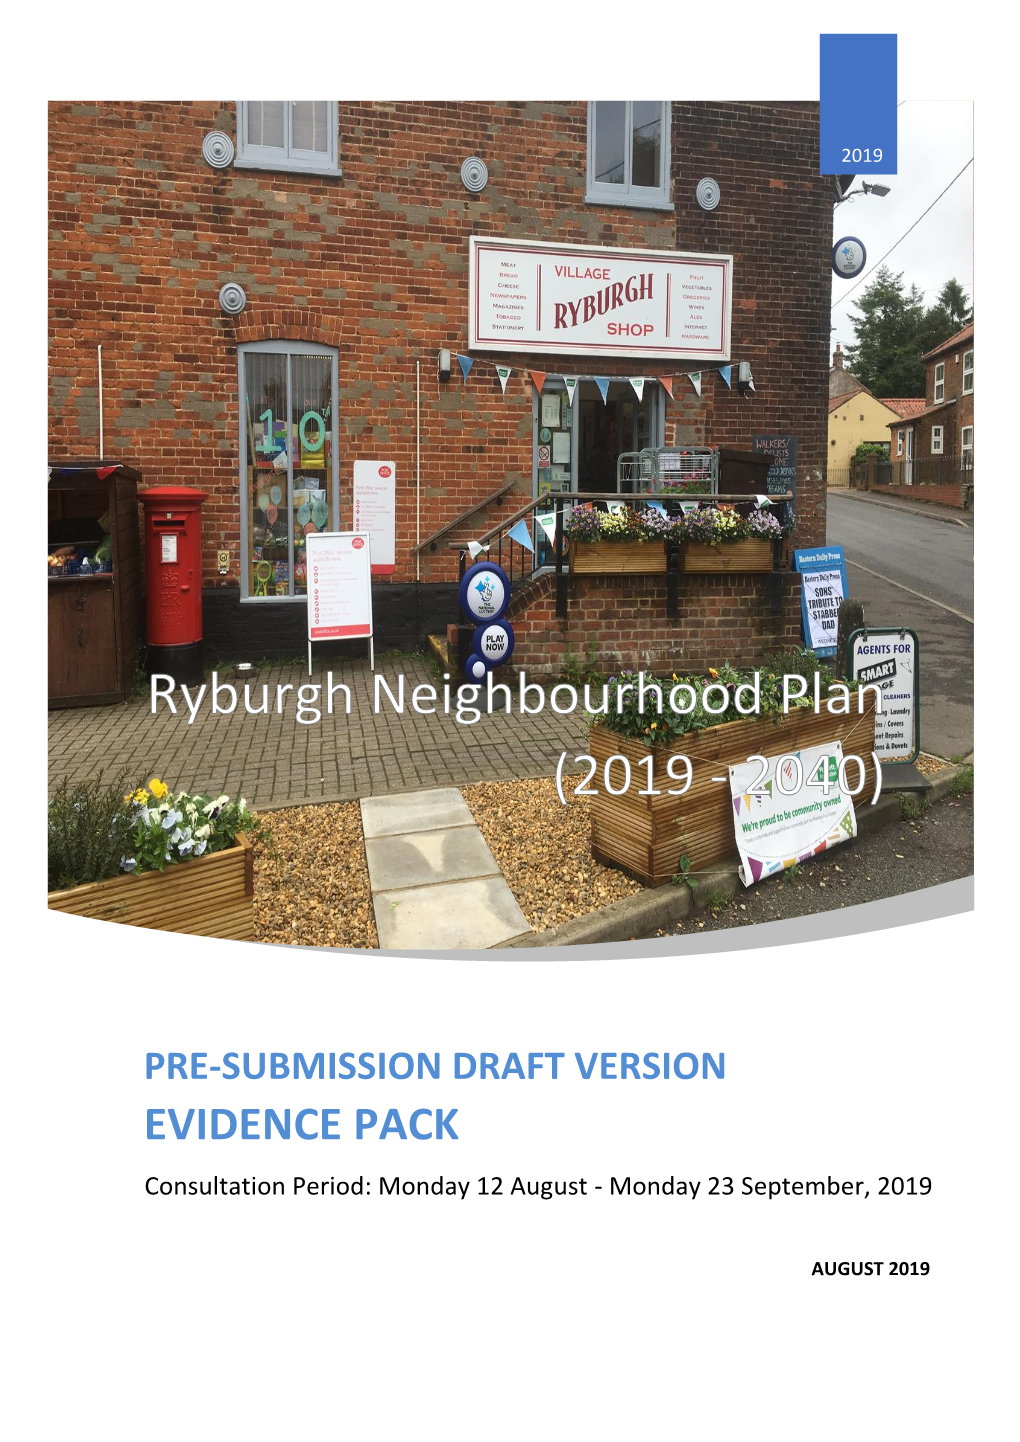 EVIDENCE PACK Consultation Period: Monday 12 August - Monday 23 September, 2019